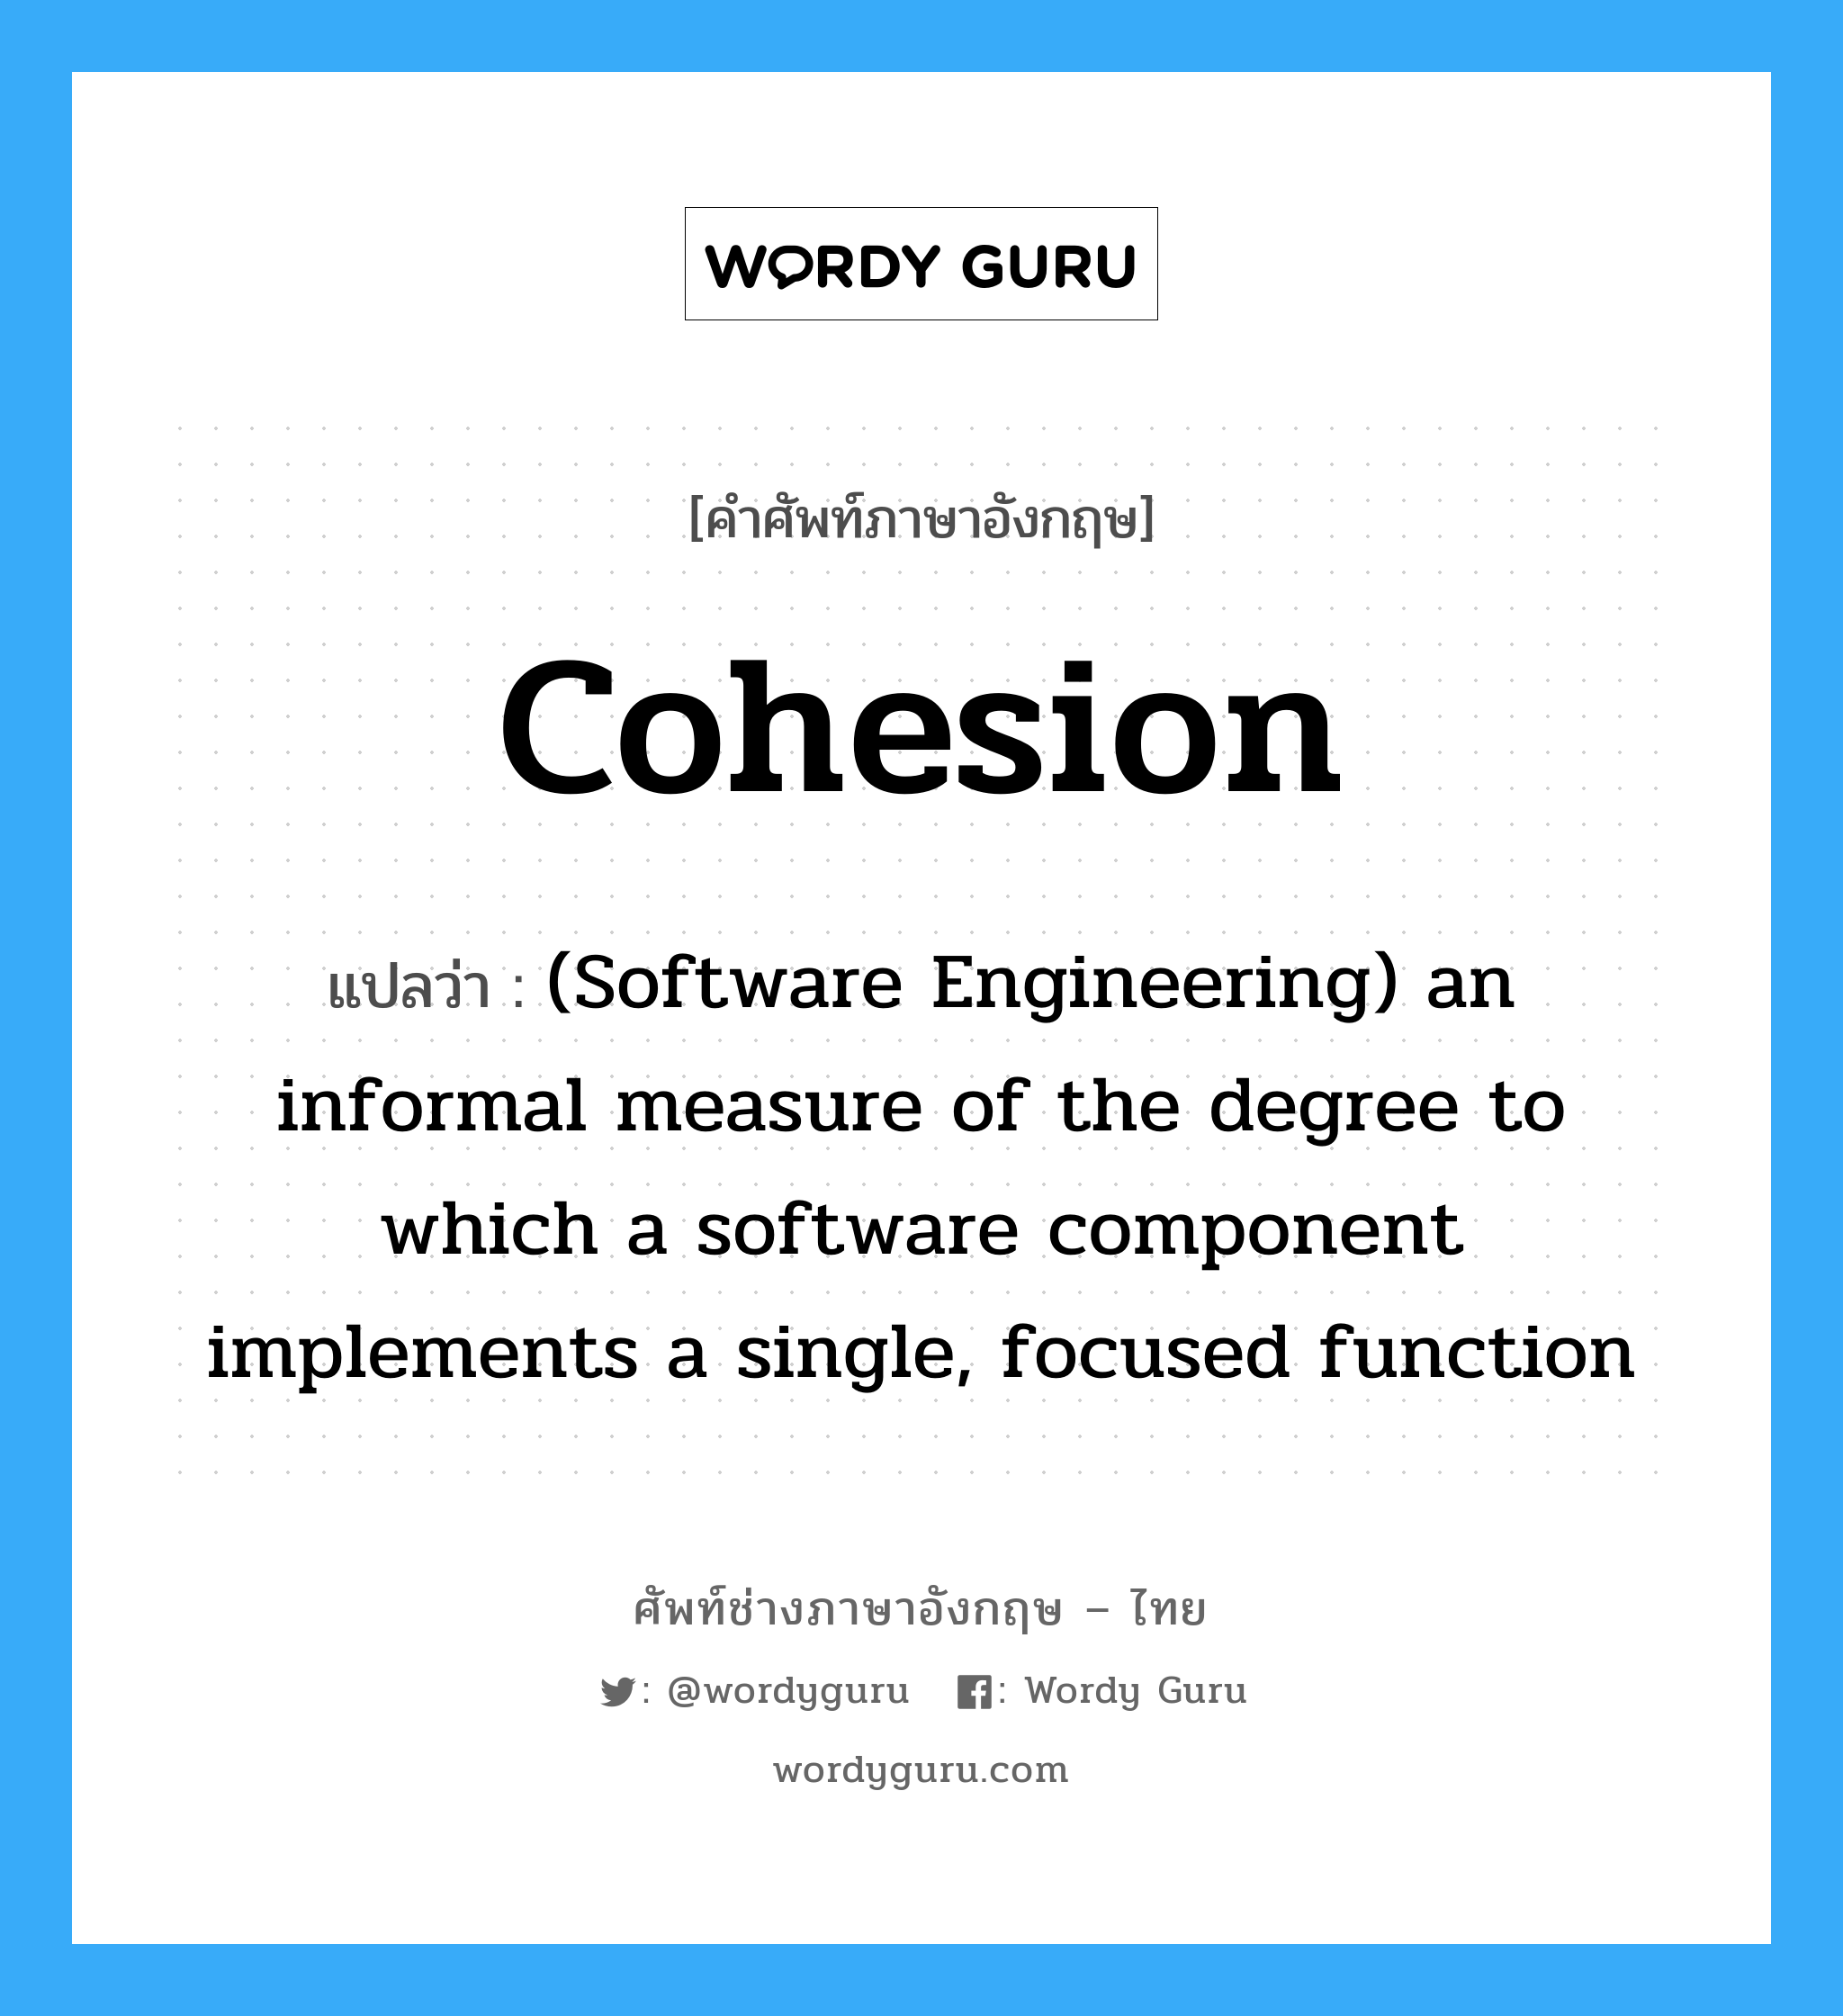 Cohesion แปลว่า?, คำศัพท์ช่างภาษาอังกฤษ - ไทย Cohesion คำศัพท์ภาษาอังกฤษ Cohesion แปลว่า (Software Engineering) an informal measure of the degree to which a software component implements a single, focused function